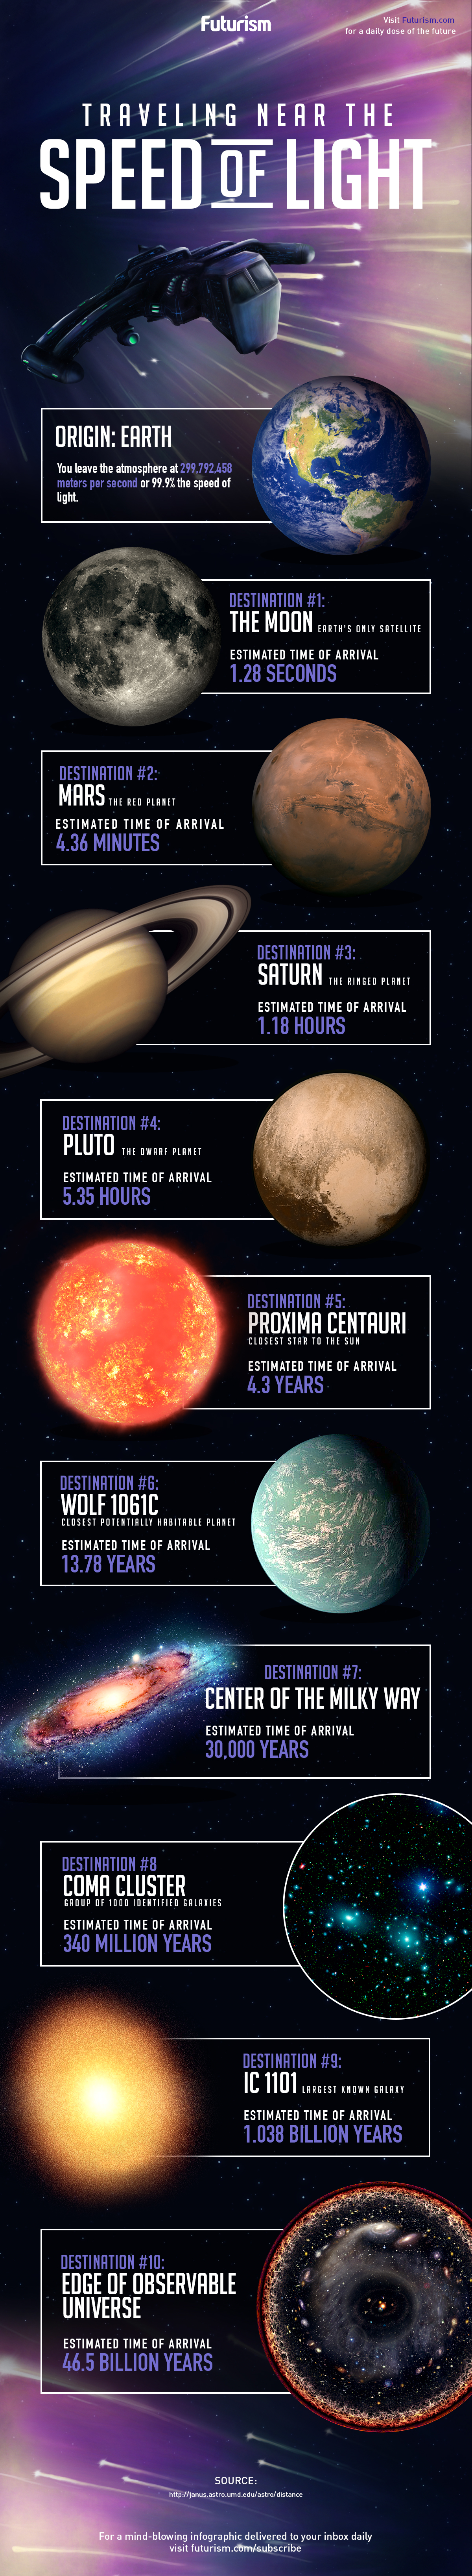 Traveling Near The Speed Of Light [Infographic]